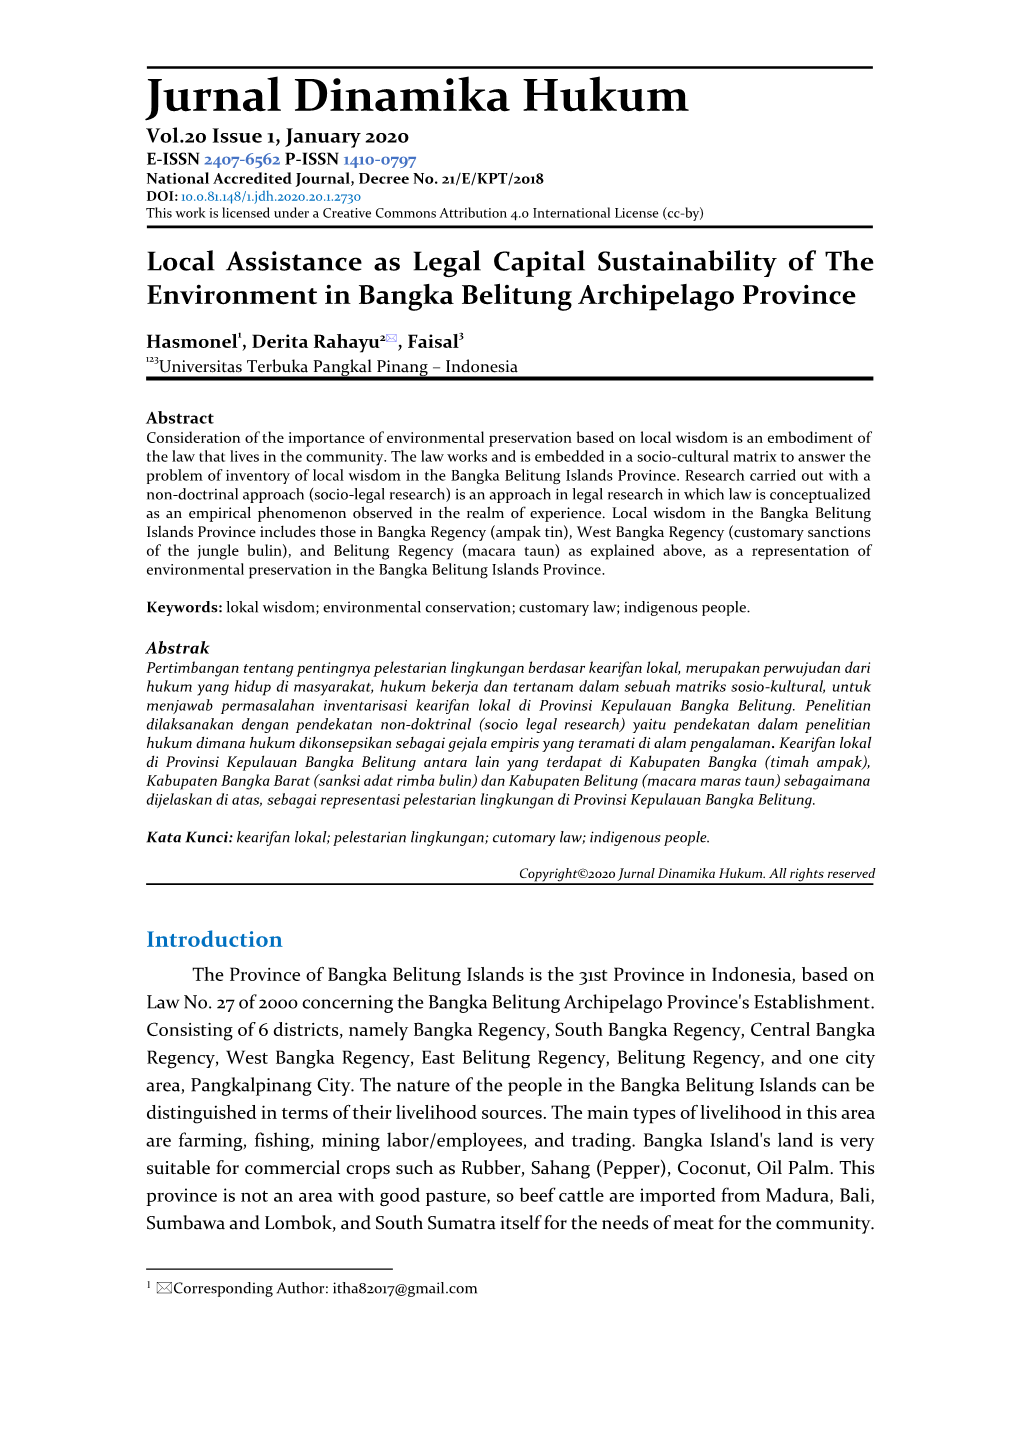 Local Assistance As Legal Capital Sustainability of the Environment in Bangka Belitung Archipelago Province